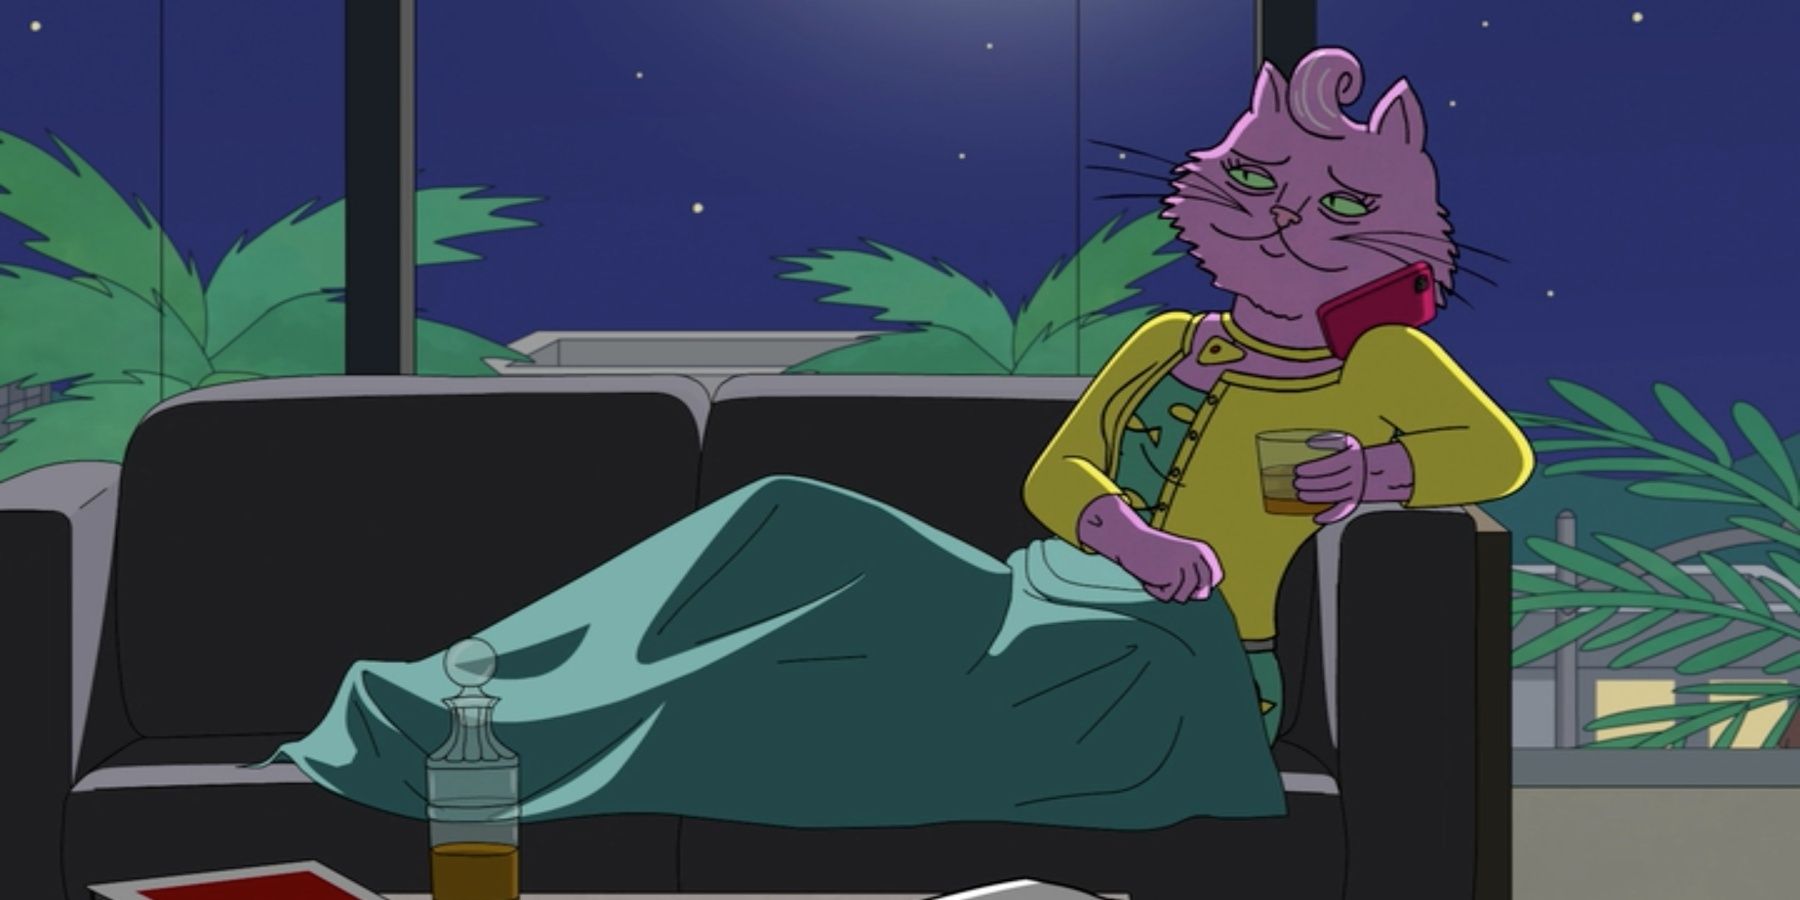 Princess Carolyn lounges on a couch in BoJack Horseman.